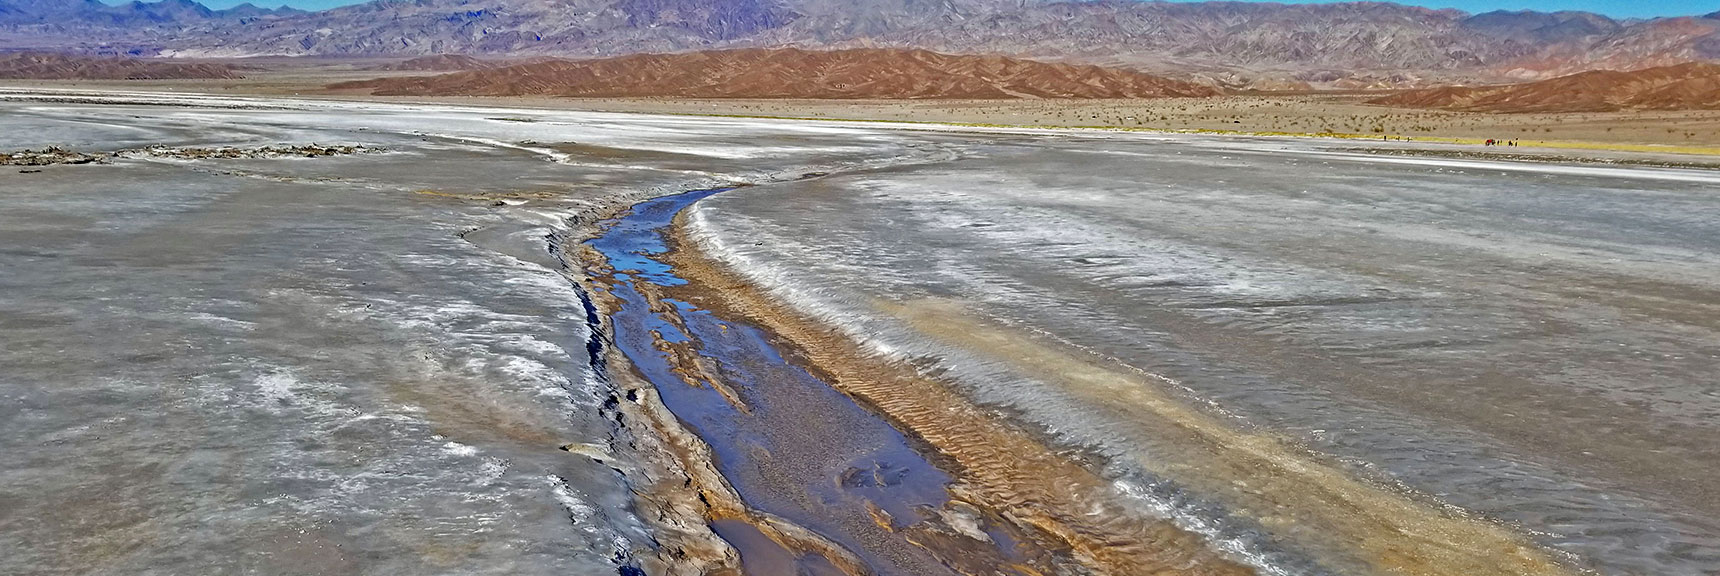 Small Stream Winds Through the Desert | Return of Lake Manly (Lake in Death Valley) | Death Valley National Park, California